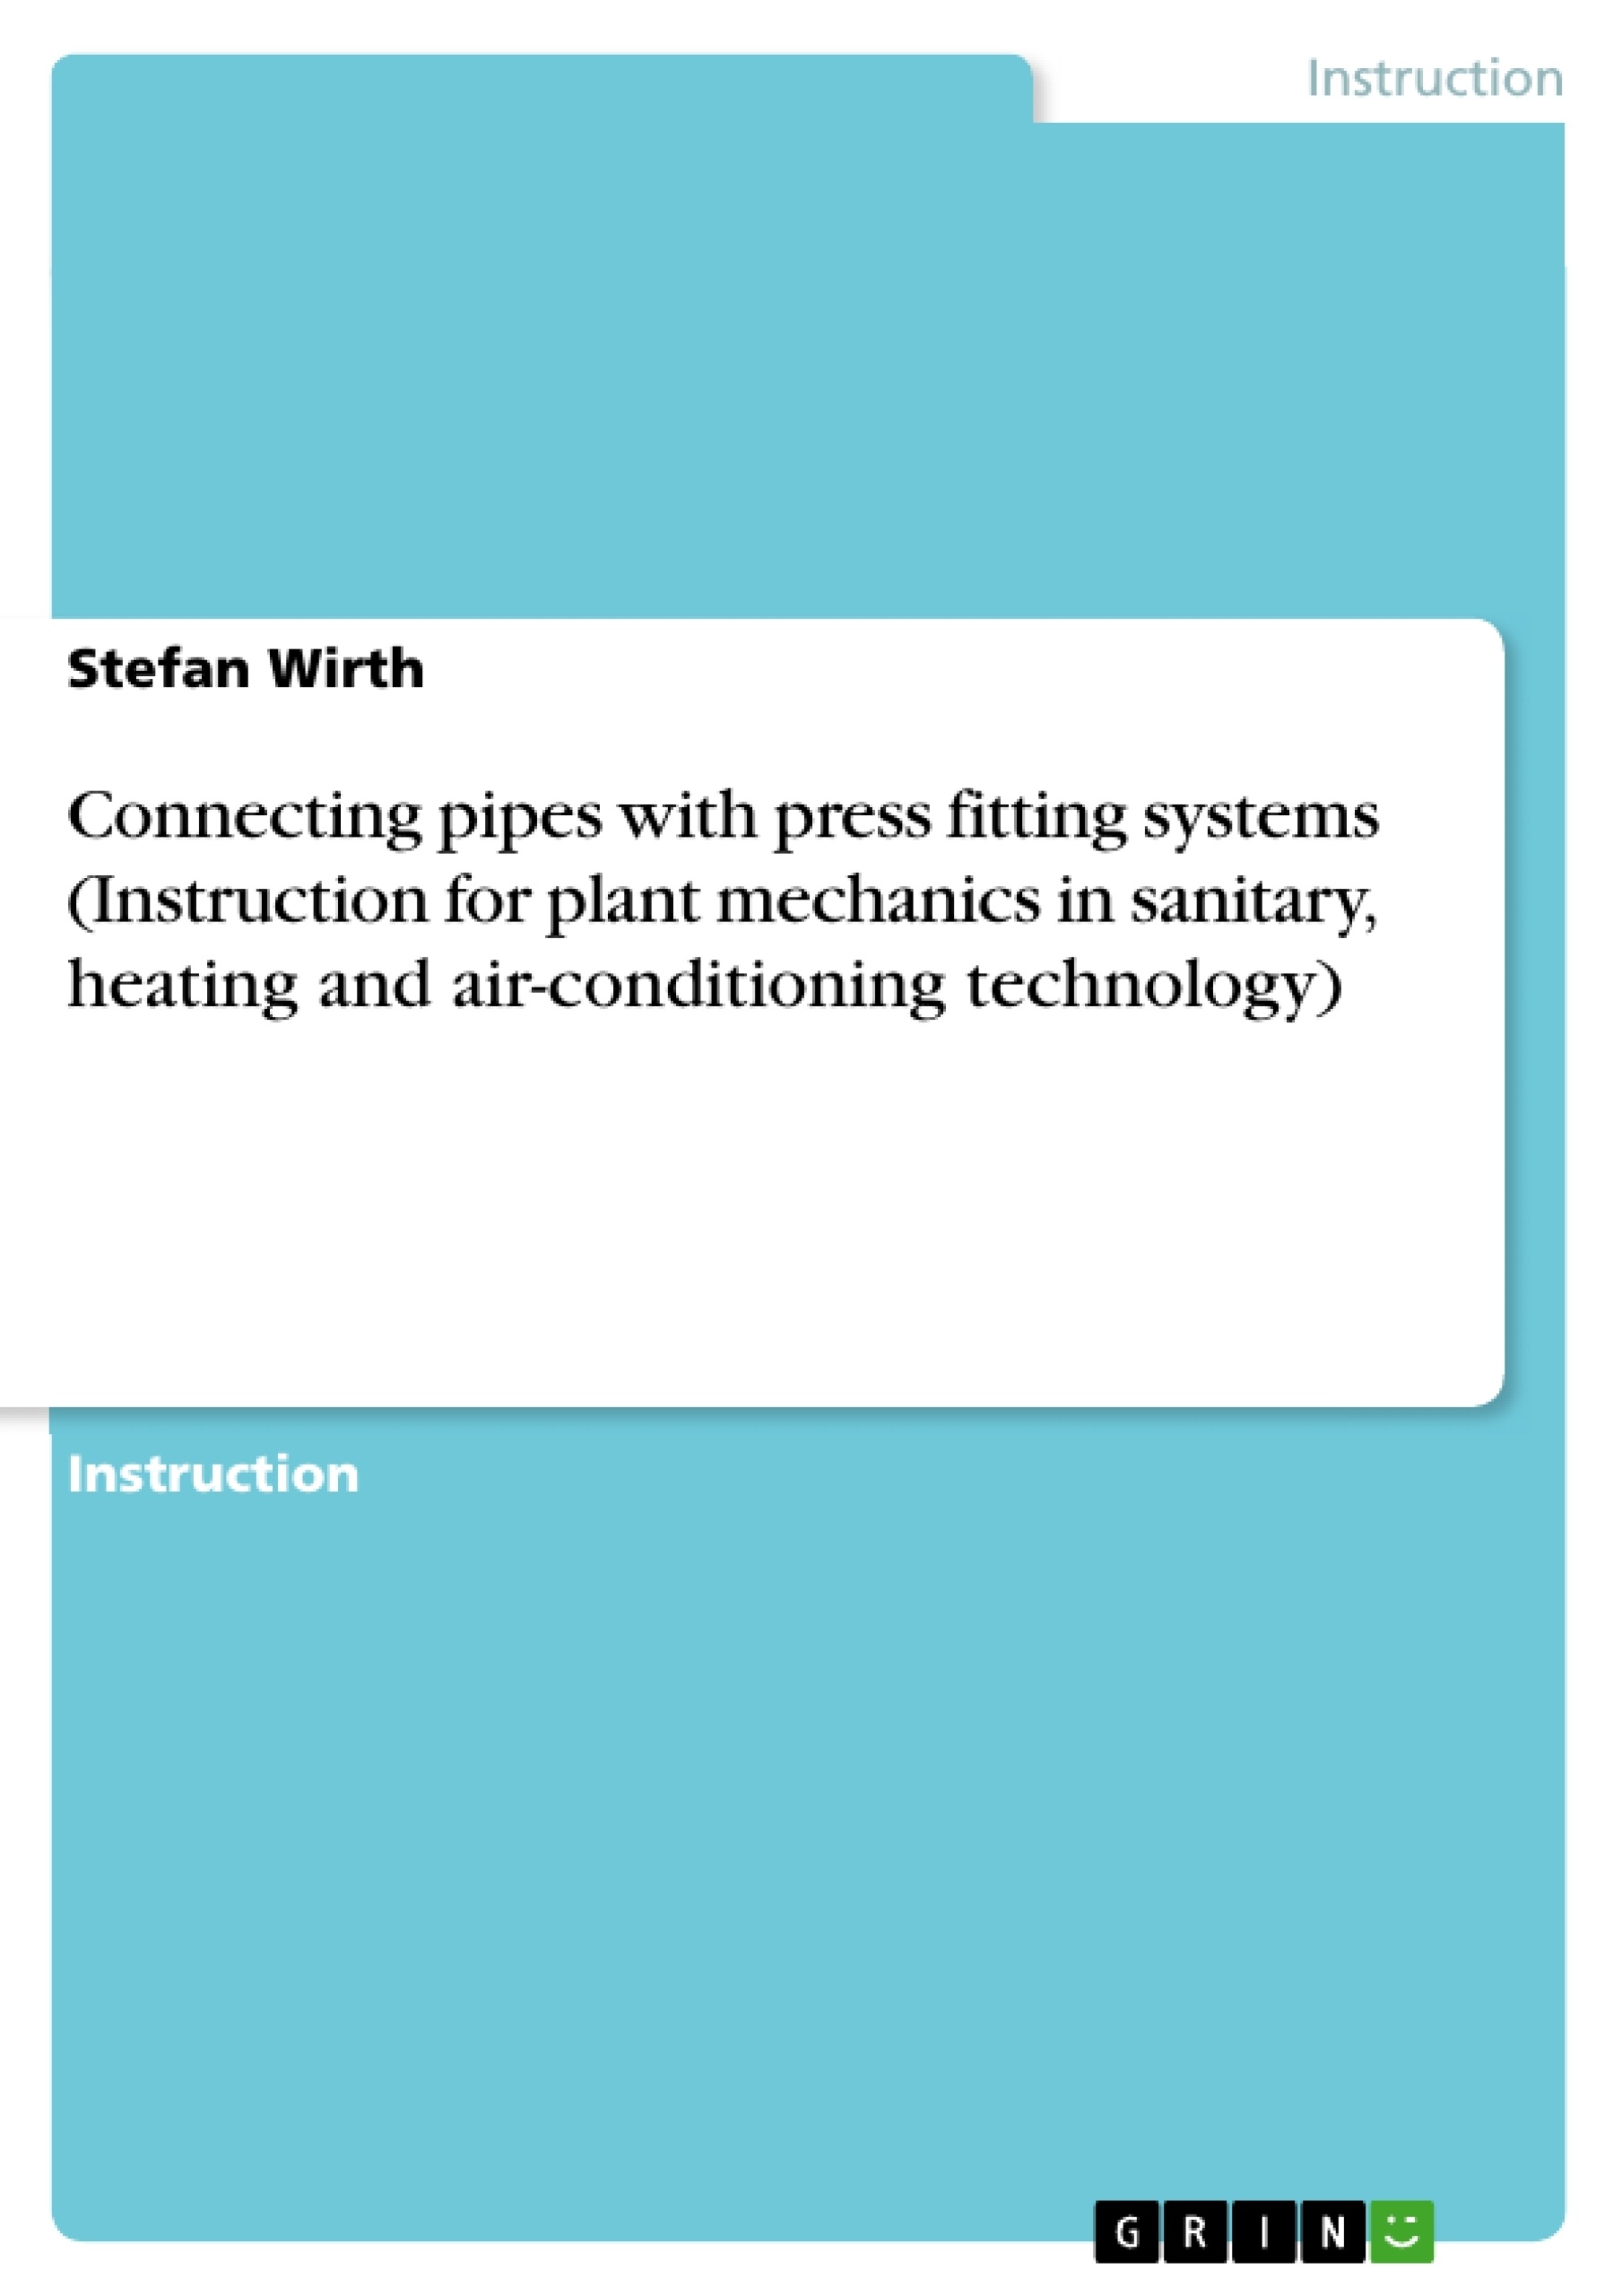 Connecting pipes with press fitting systems (Instruction for plant